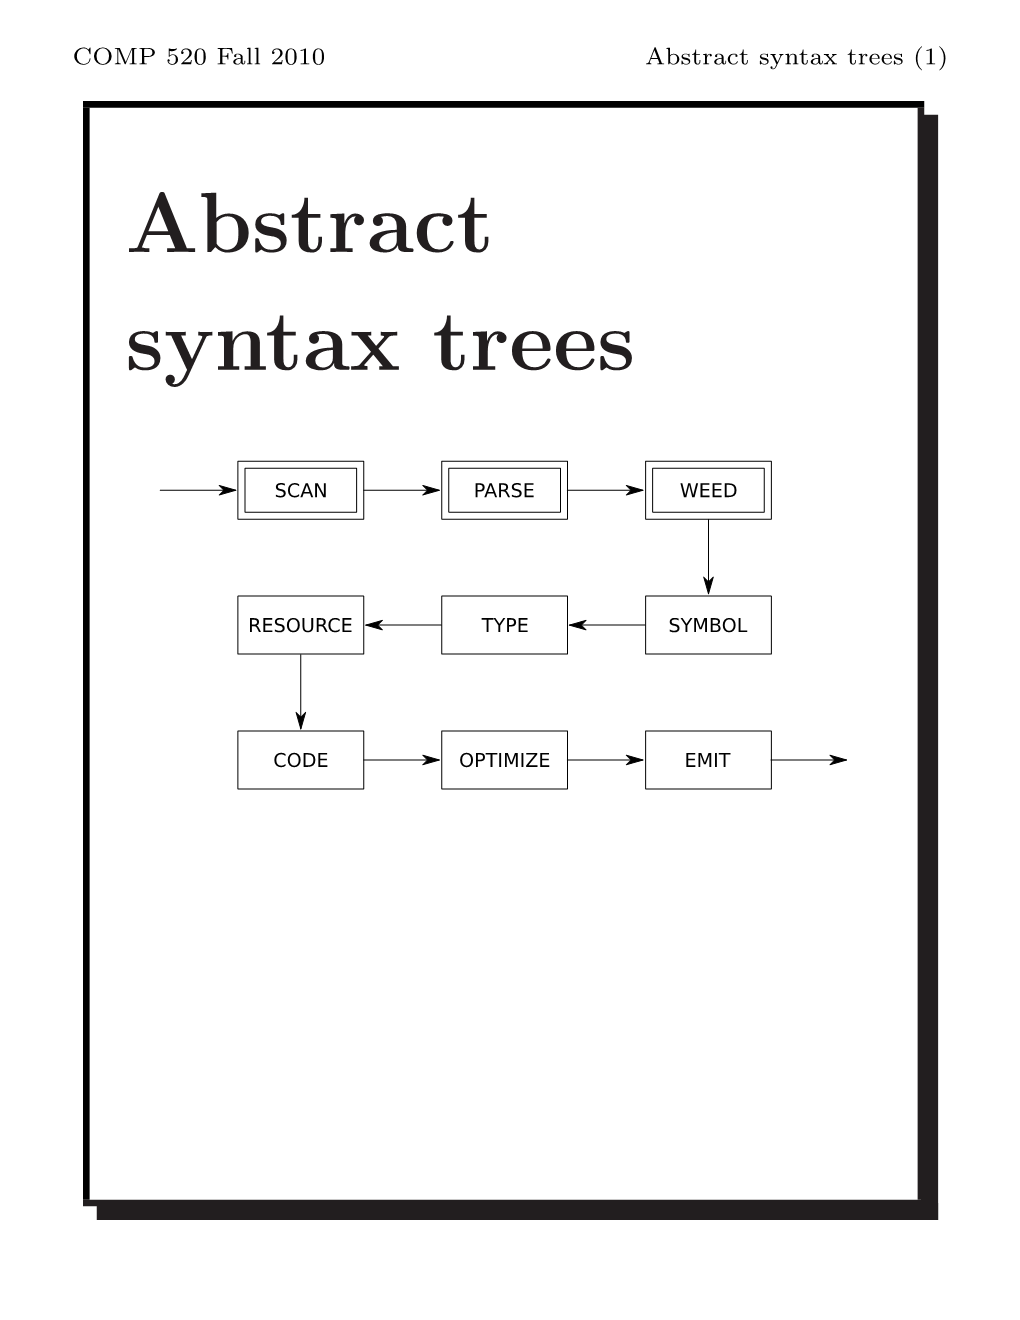 Week 3 Slides on Abstract Syntax Trees